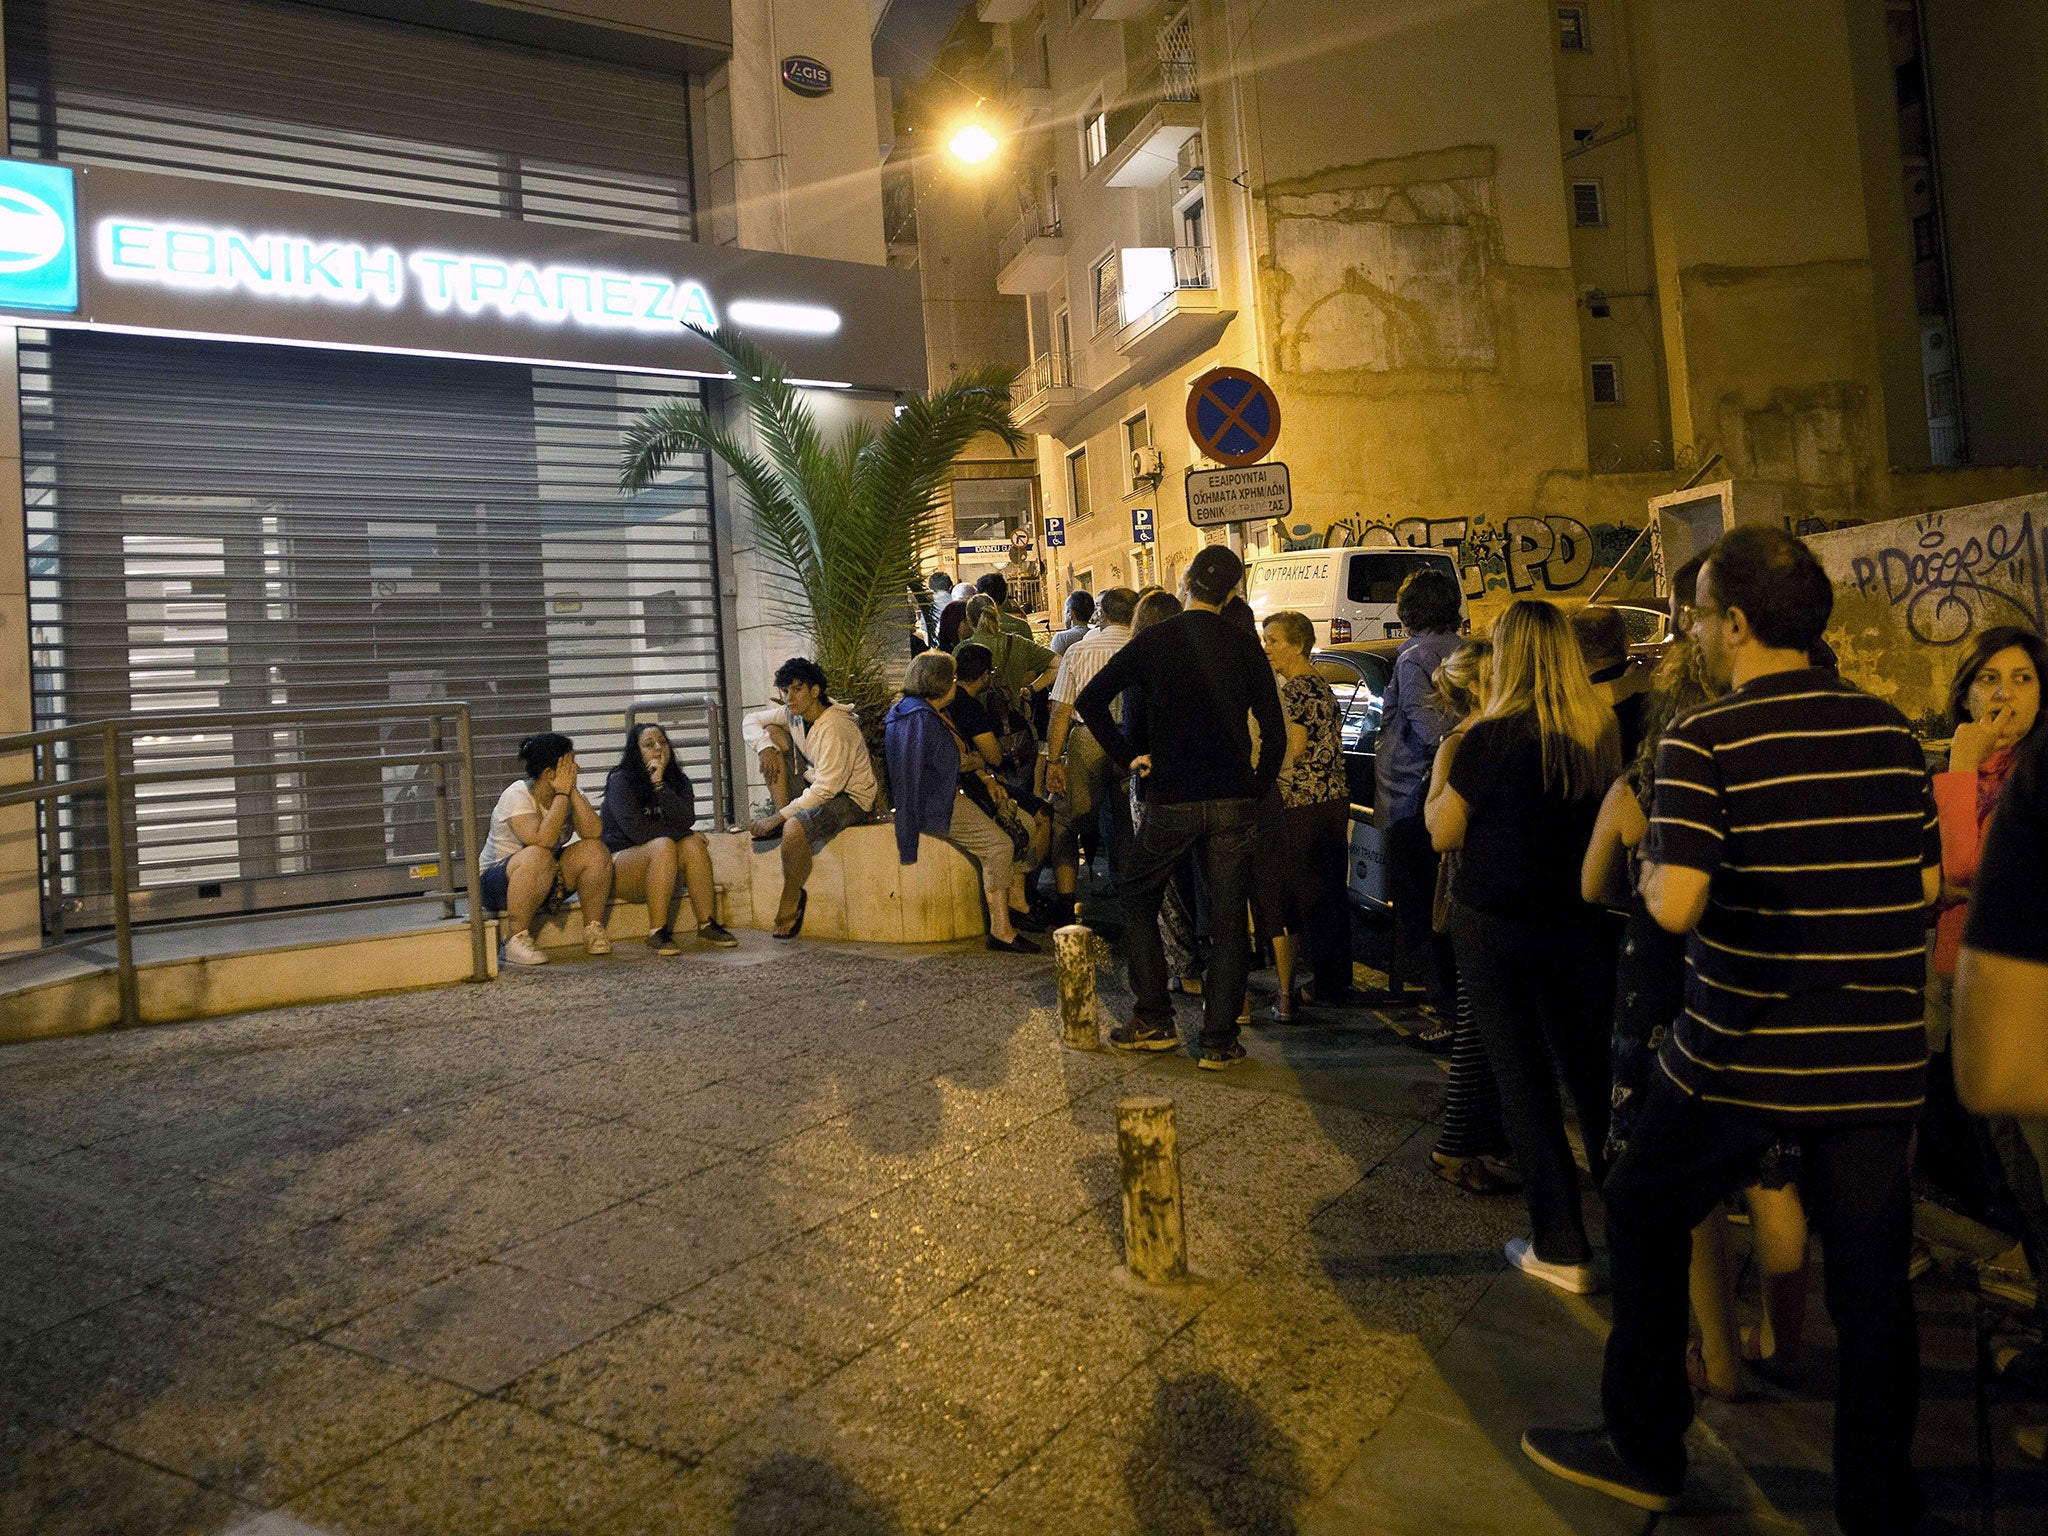 Greek people queue in front of an ATM mache to withdraw cash from a National Bank of Greece in central Athens on June 28, 2015